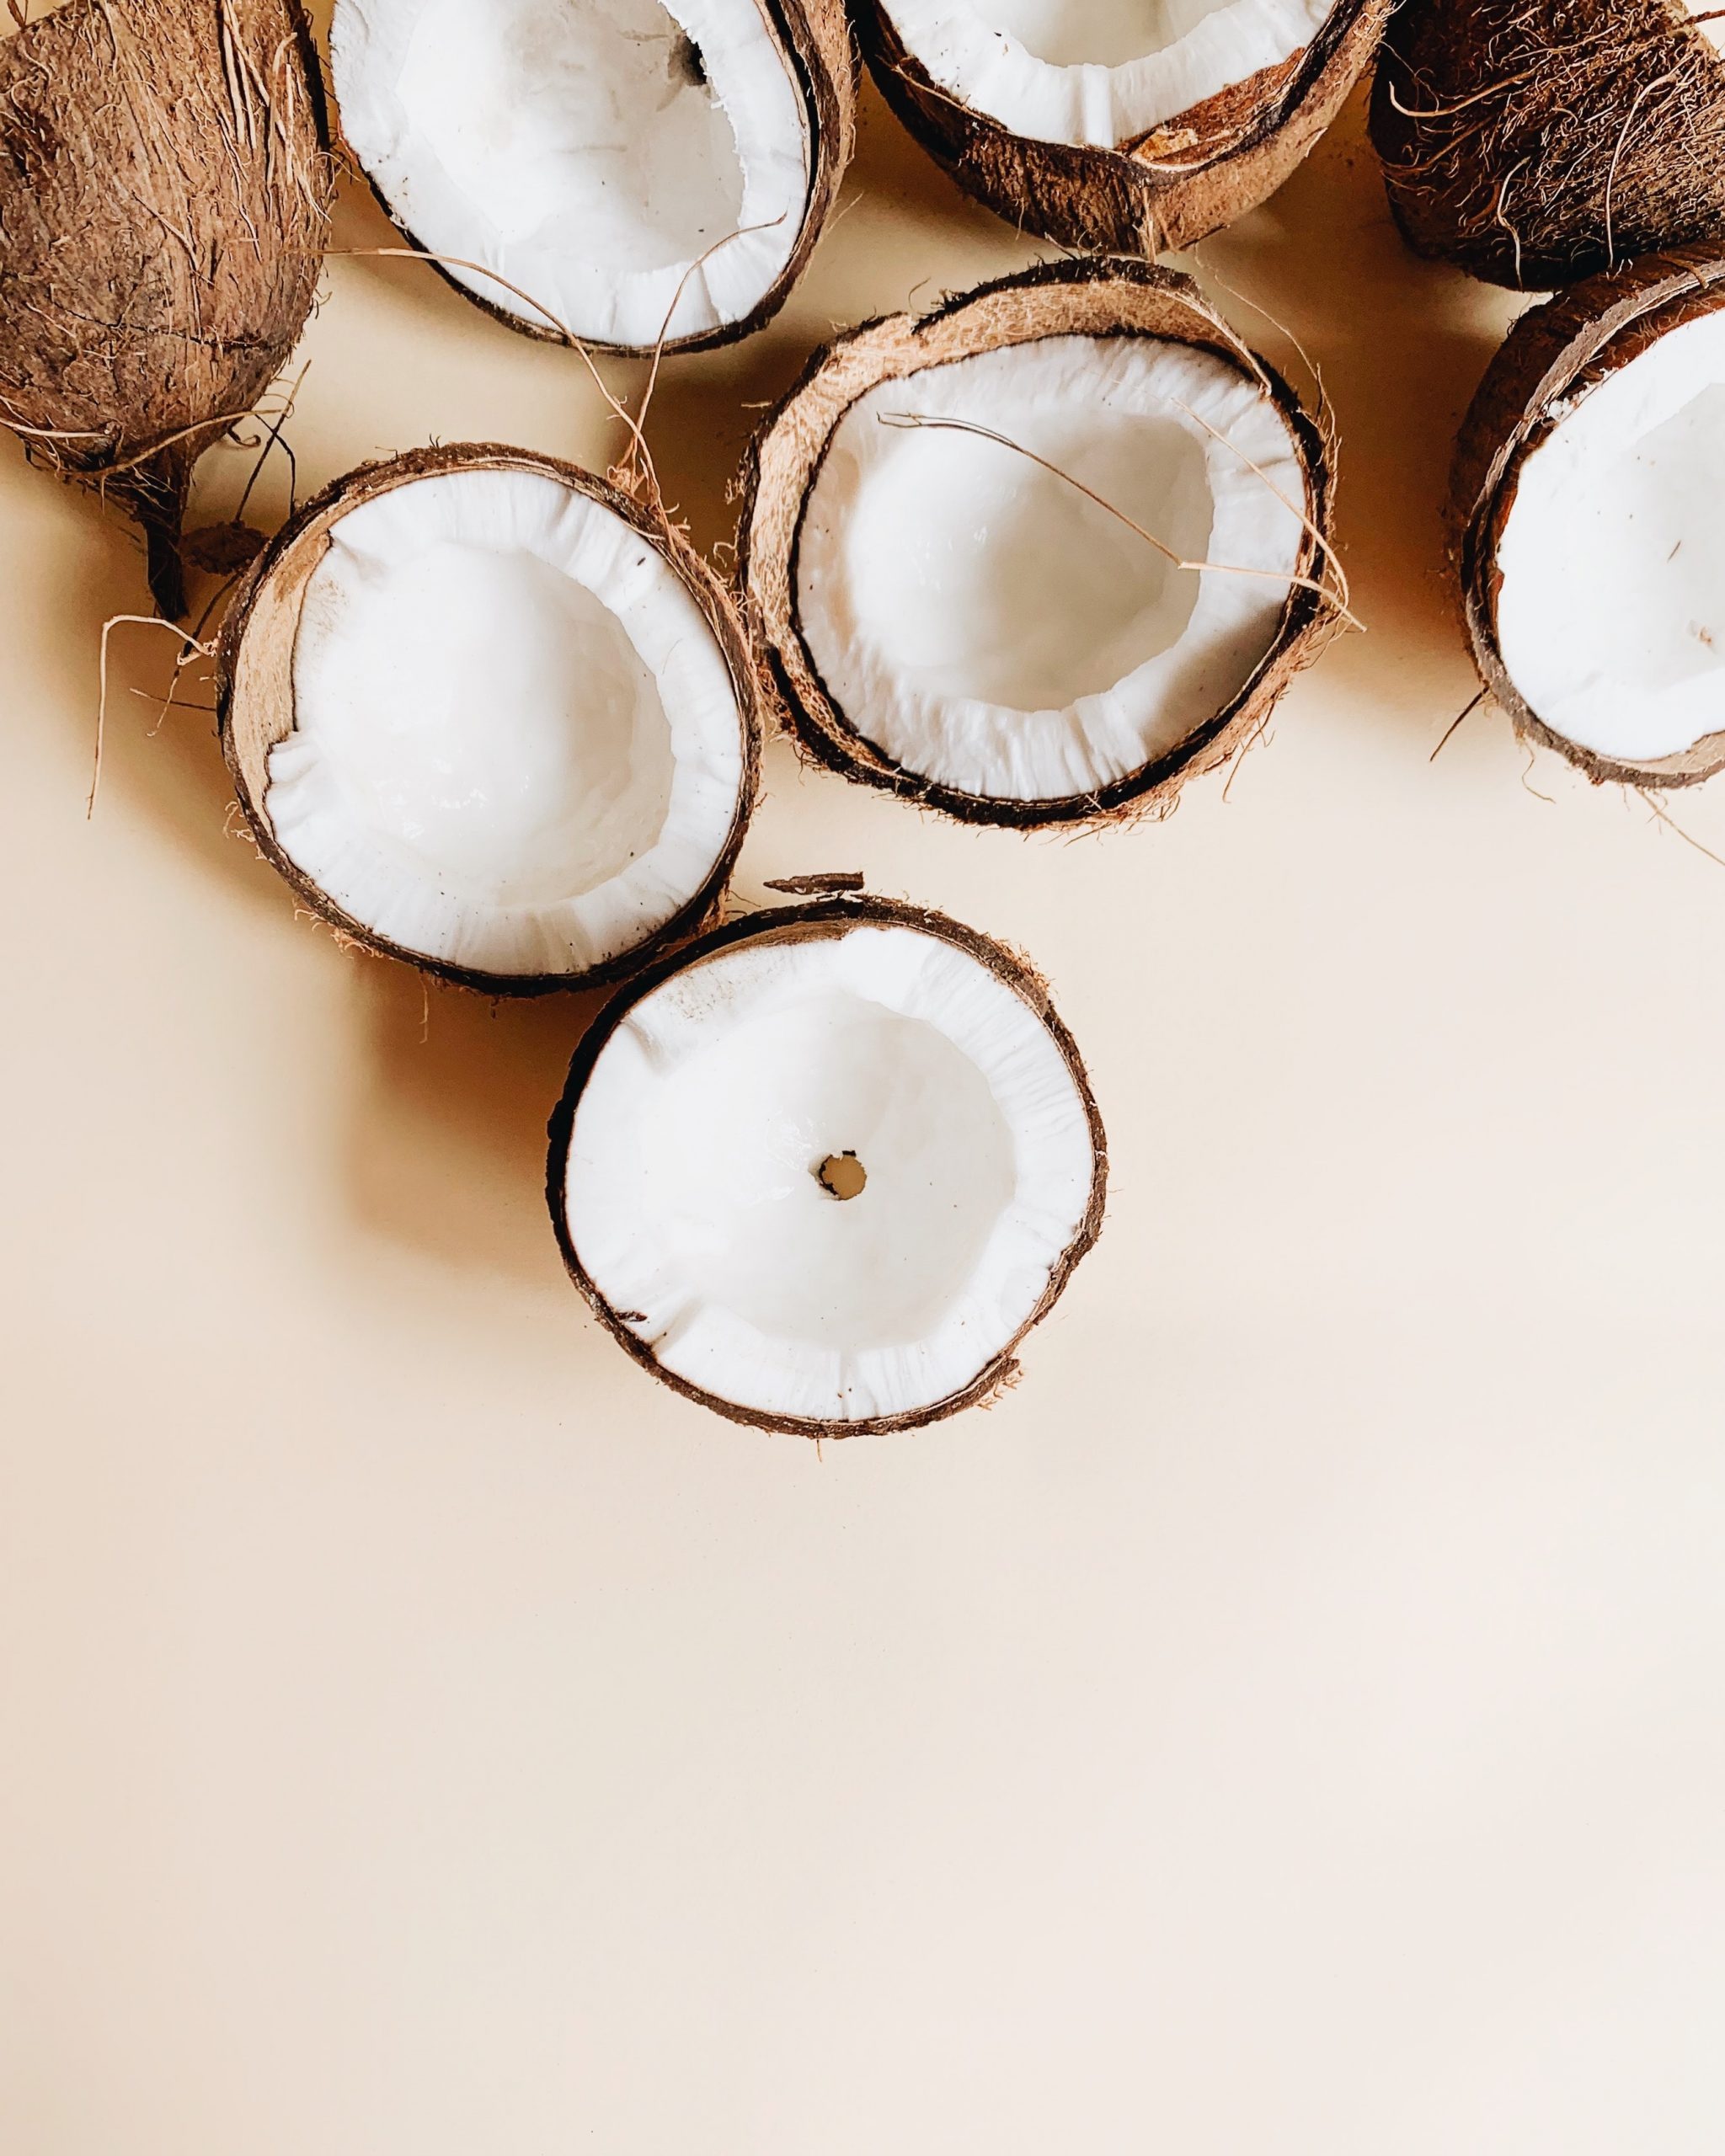 picture of coconuts, Photo by Irene Kredenets on Unsplash